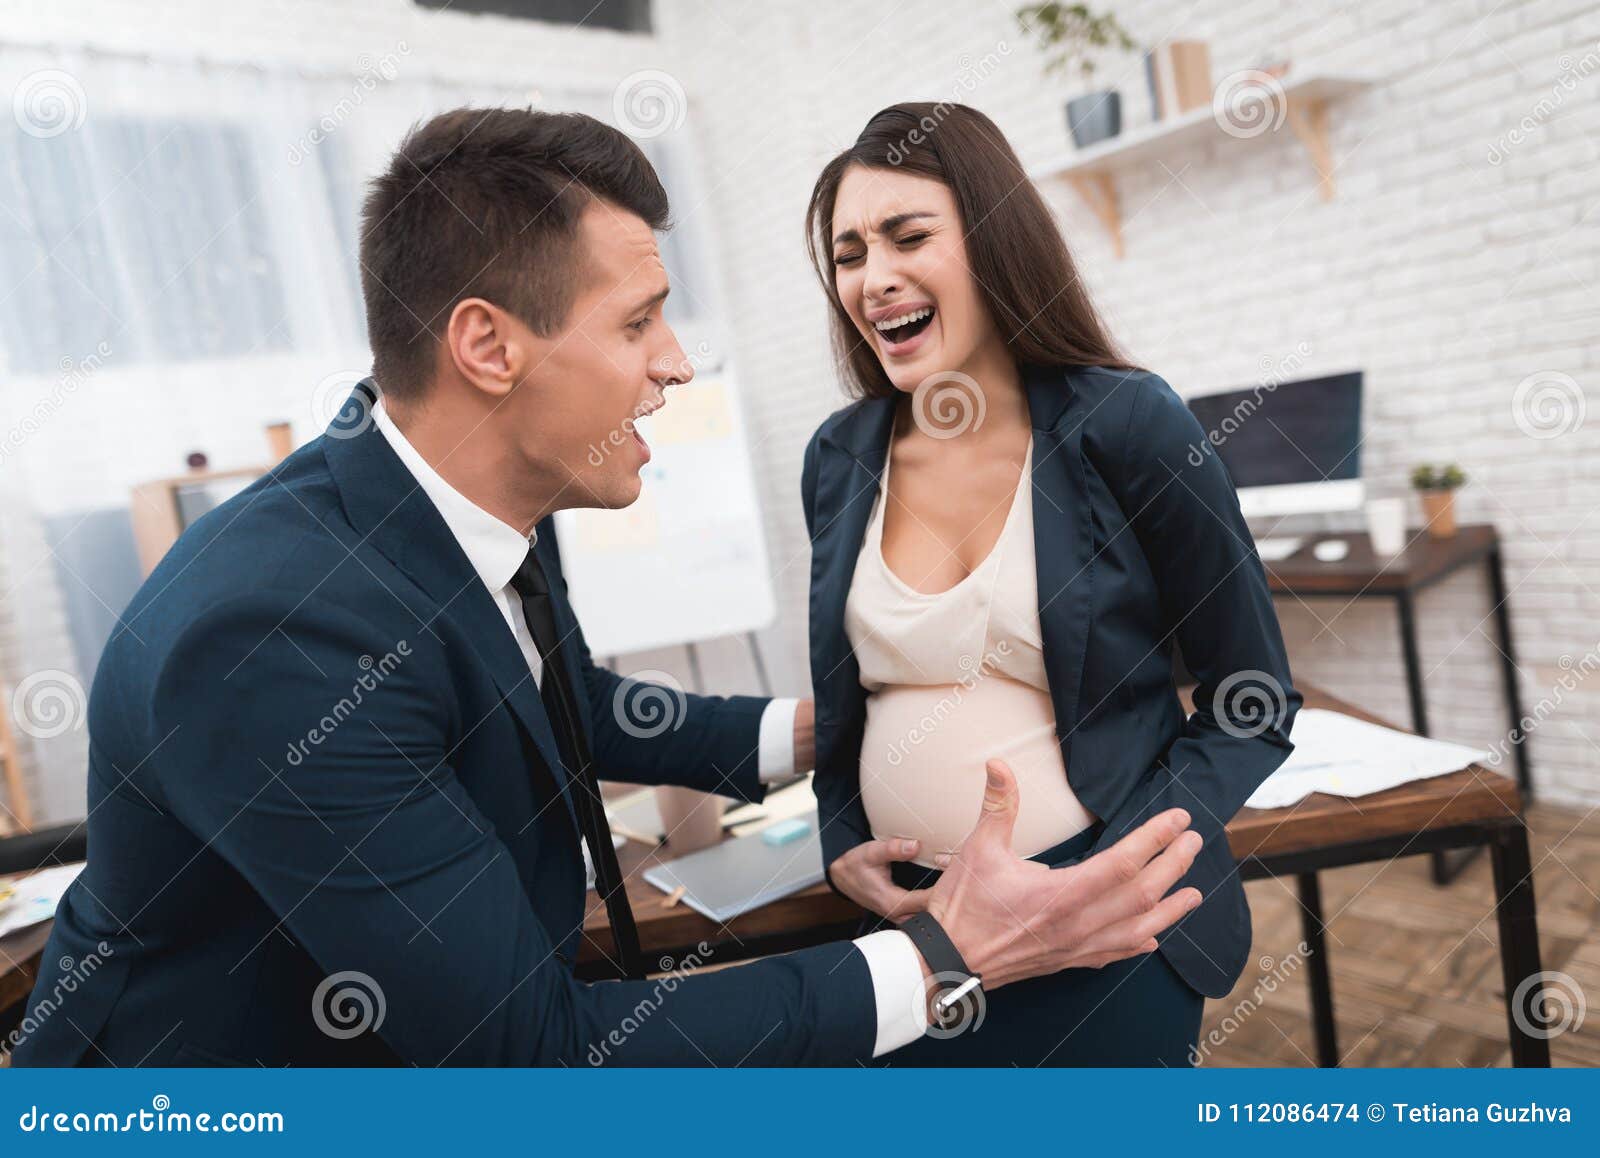 Pregnant Woman is Experiencing Labor in Office. Young Girl is ...